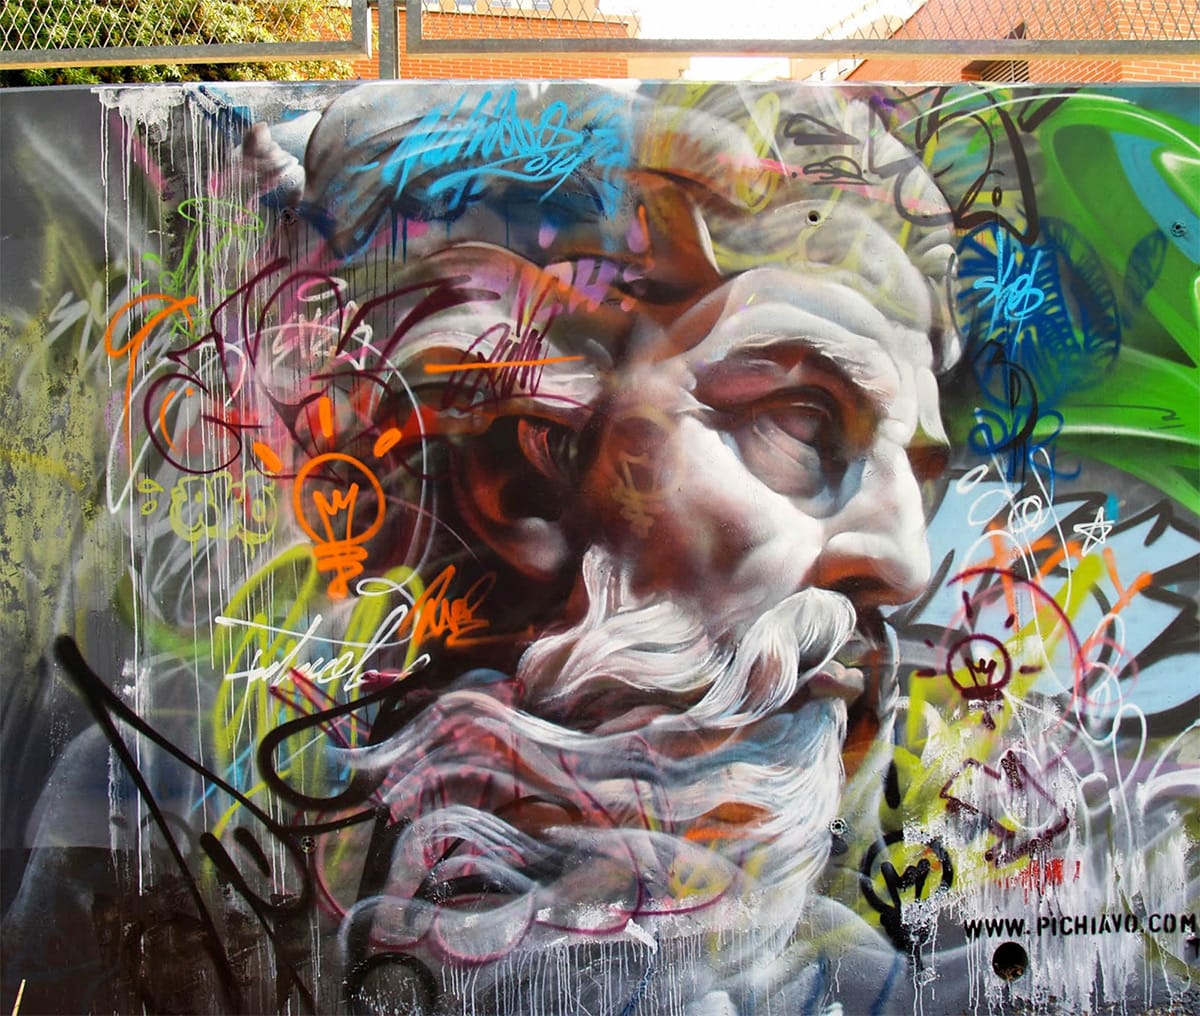 Impressive Monumental Murals That Blend Classical Figures And Graffiti By Pichiavo (4)